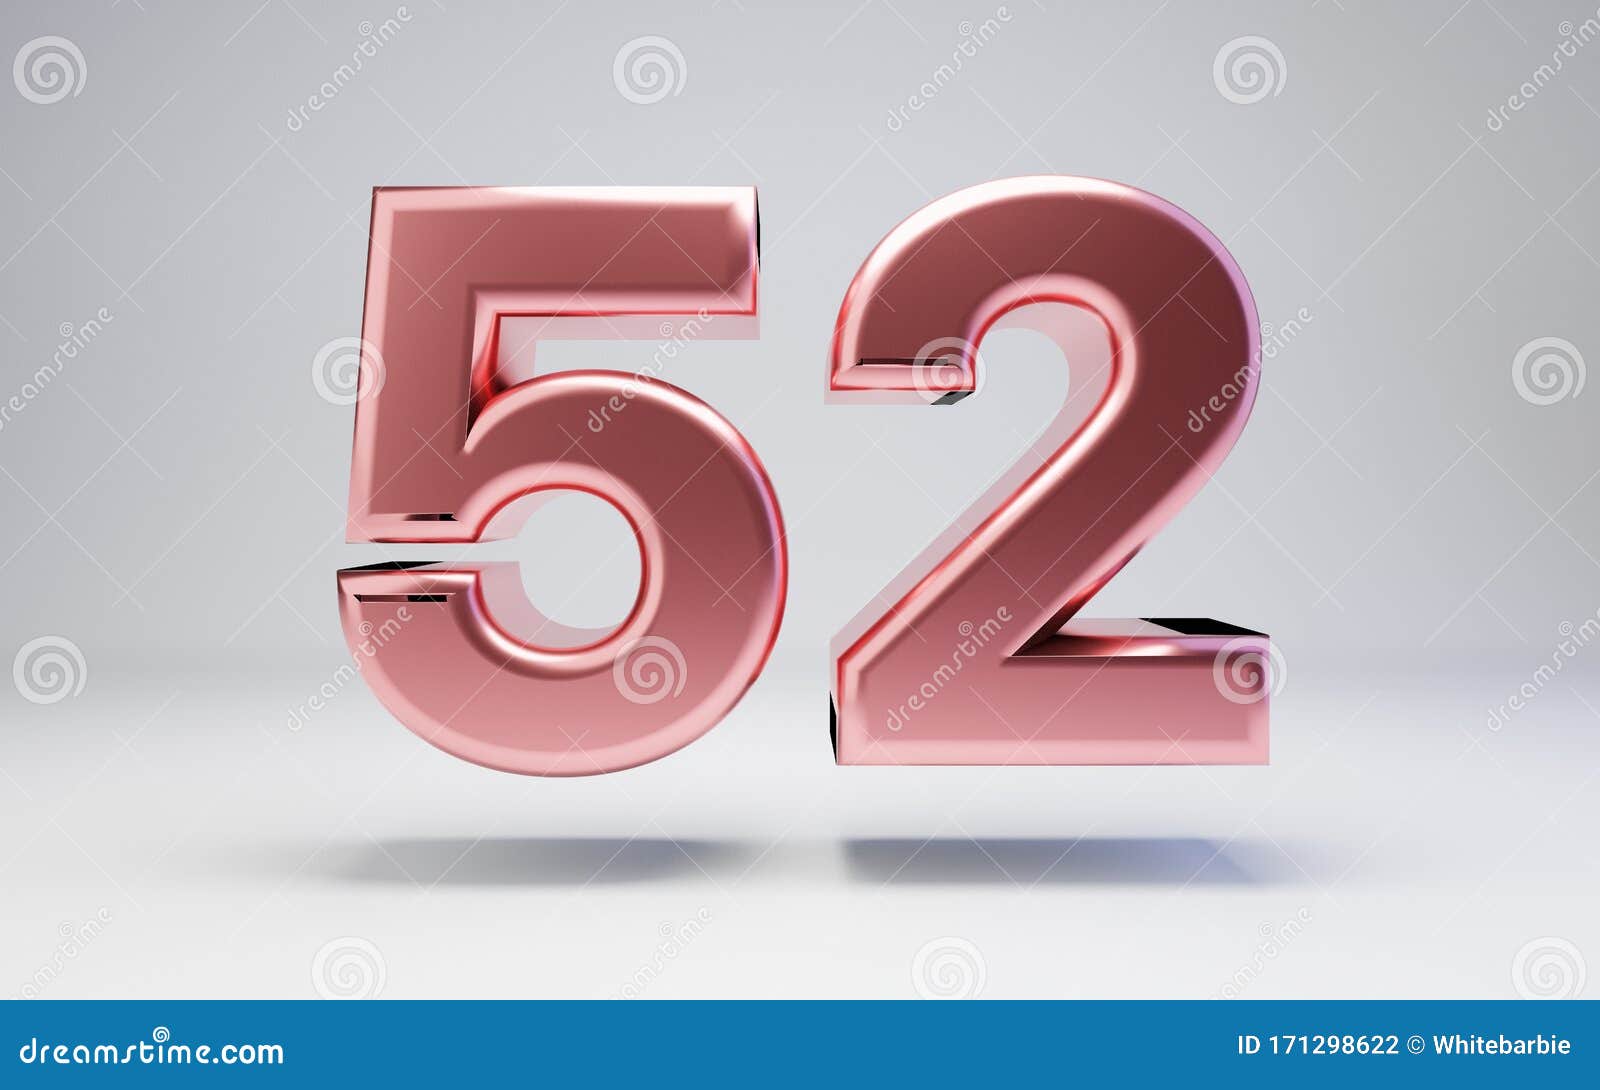 52 Note Brb Images, Stock Photos, 3D objects, & Vectors